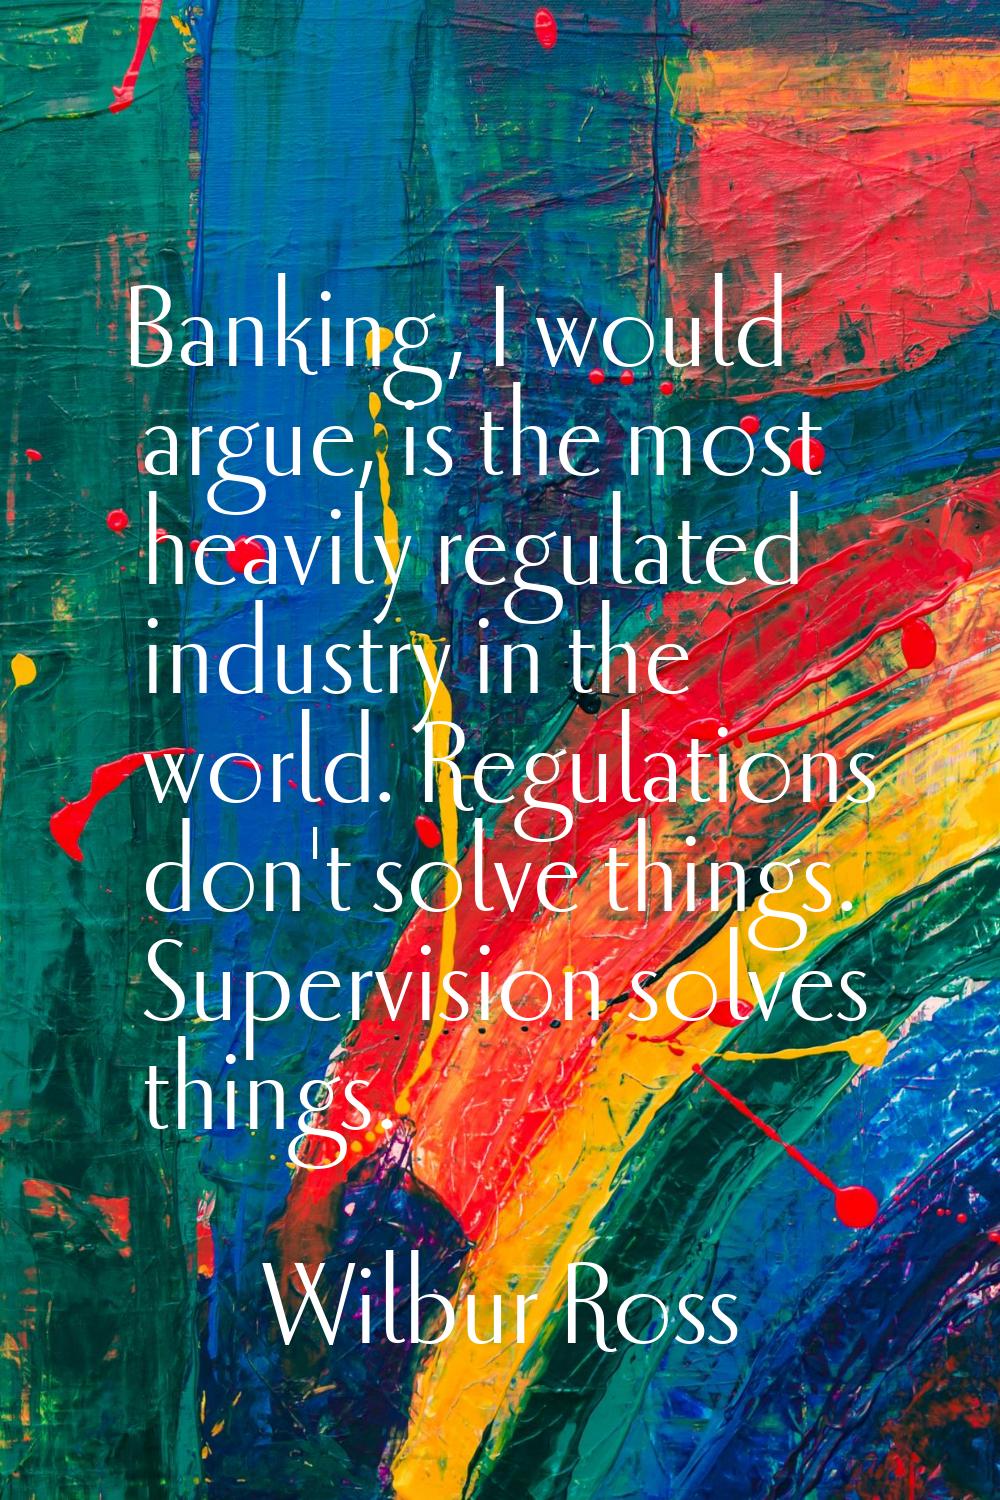 Banking, I would argue, is the most heavily regulated industry in the world. Regulations don't solv